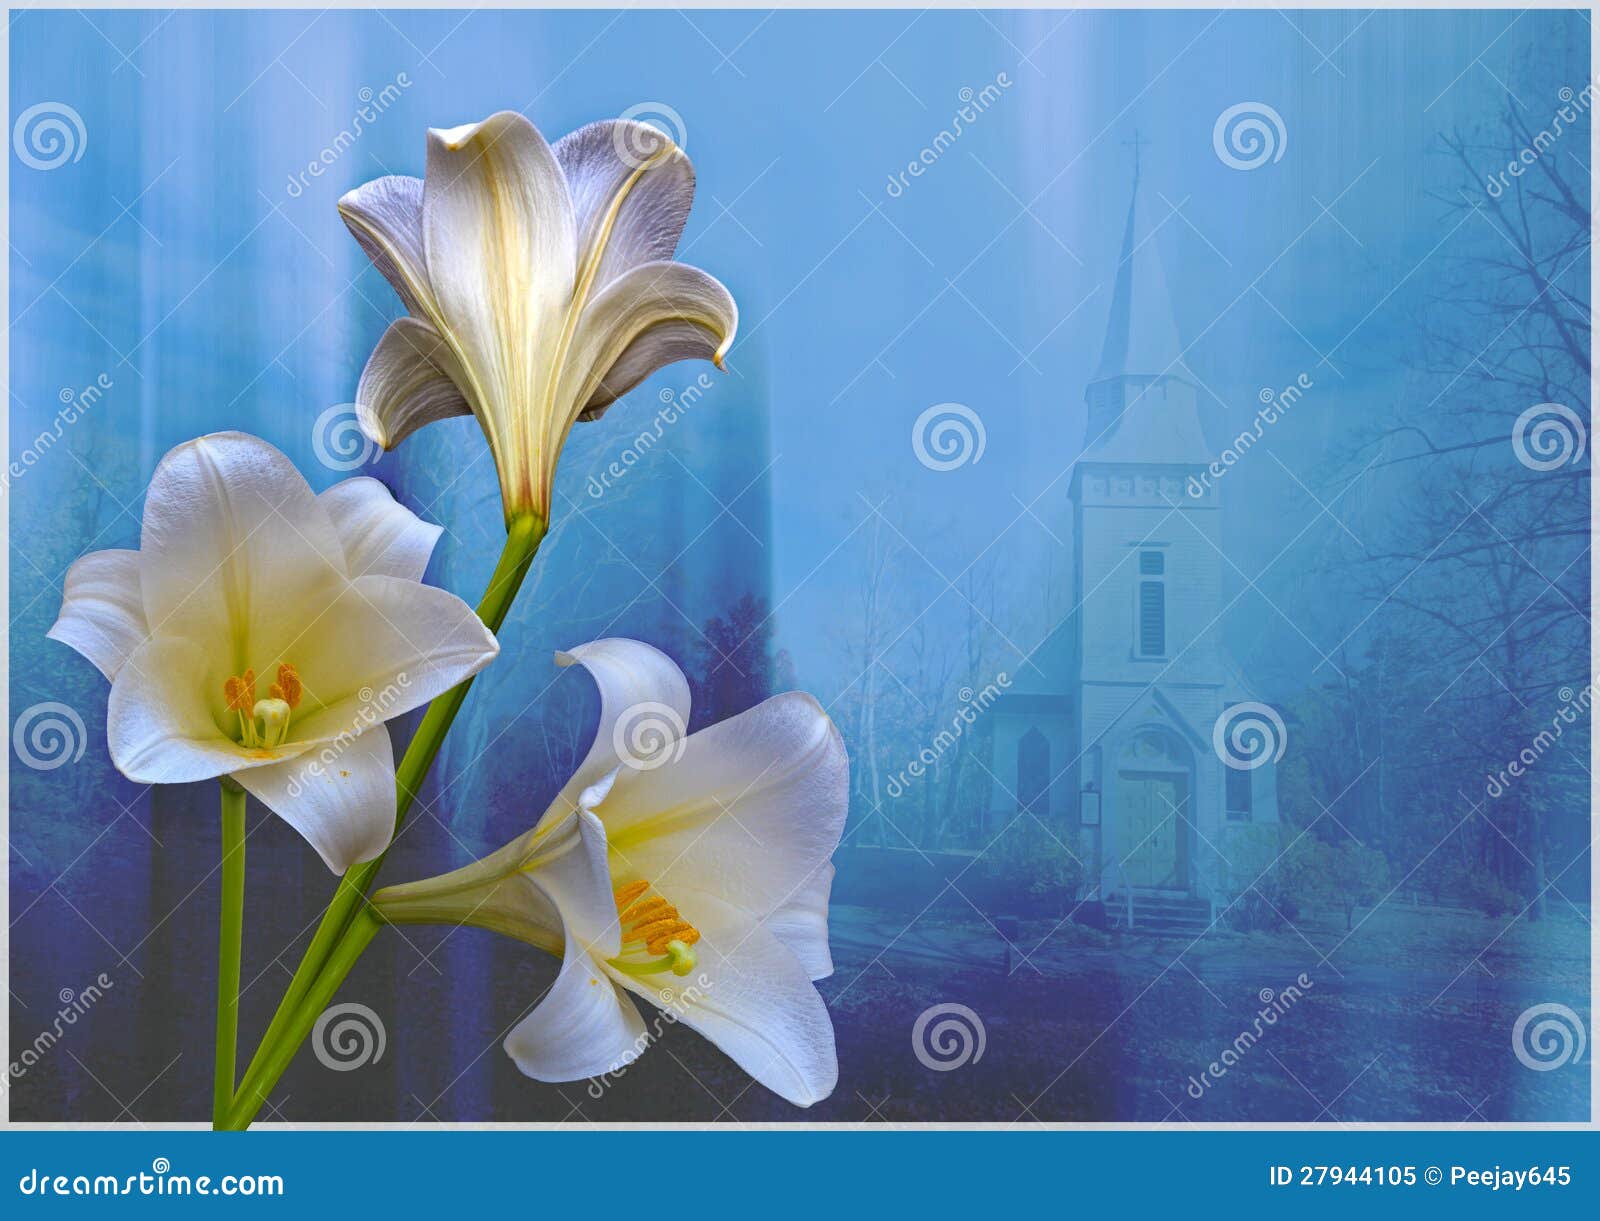 lilies and church